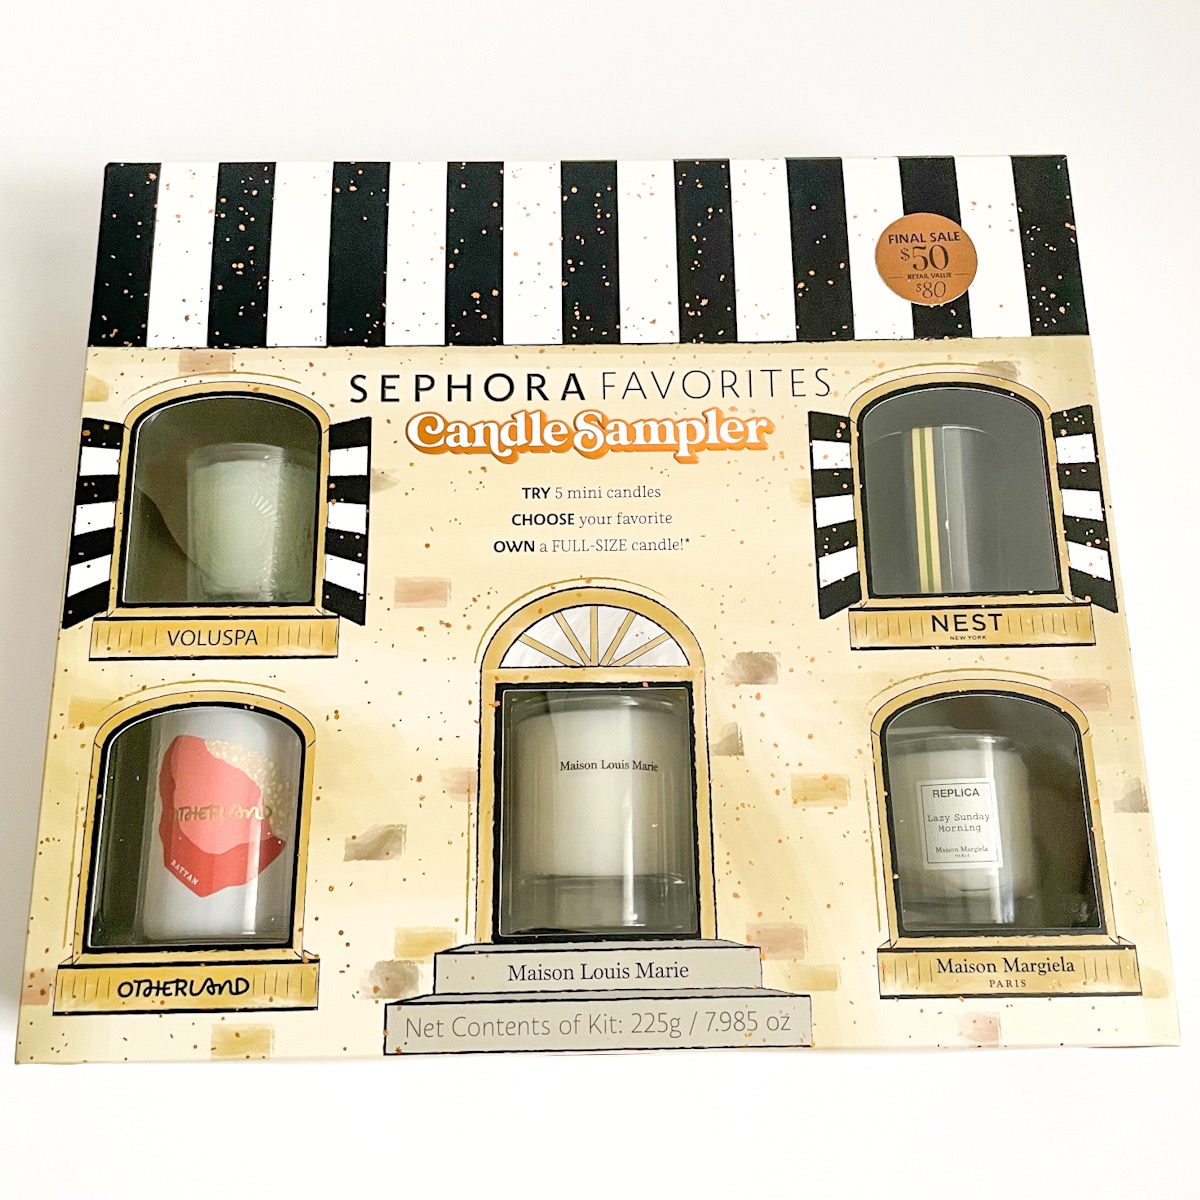 front of packaging showing candles in the window of what looks like a house